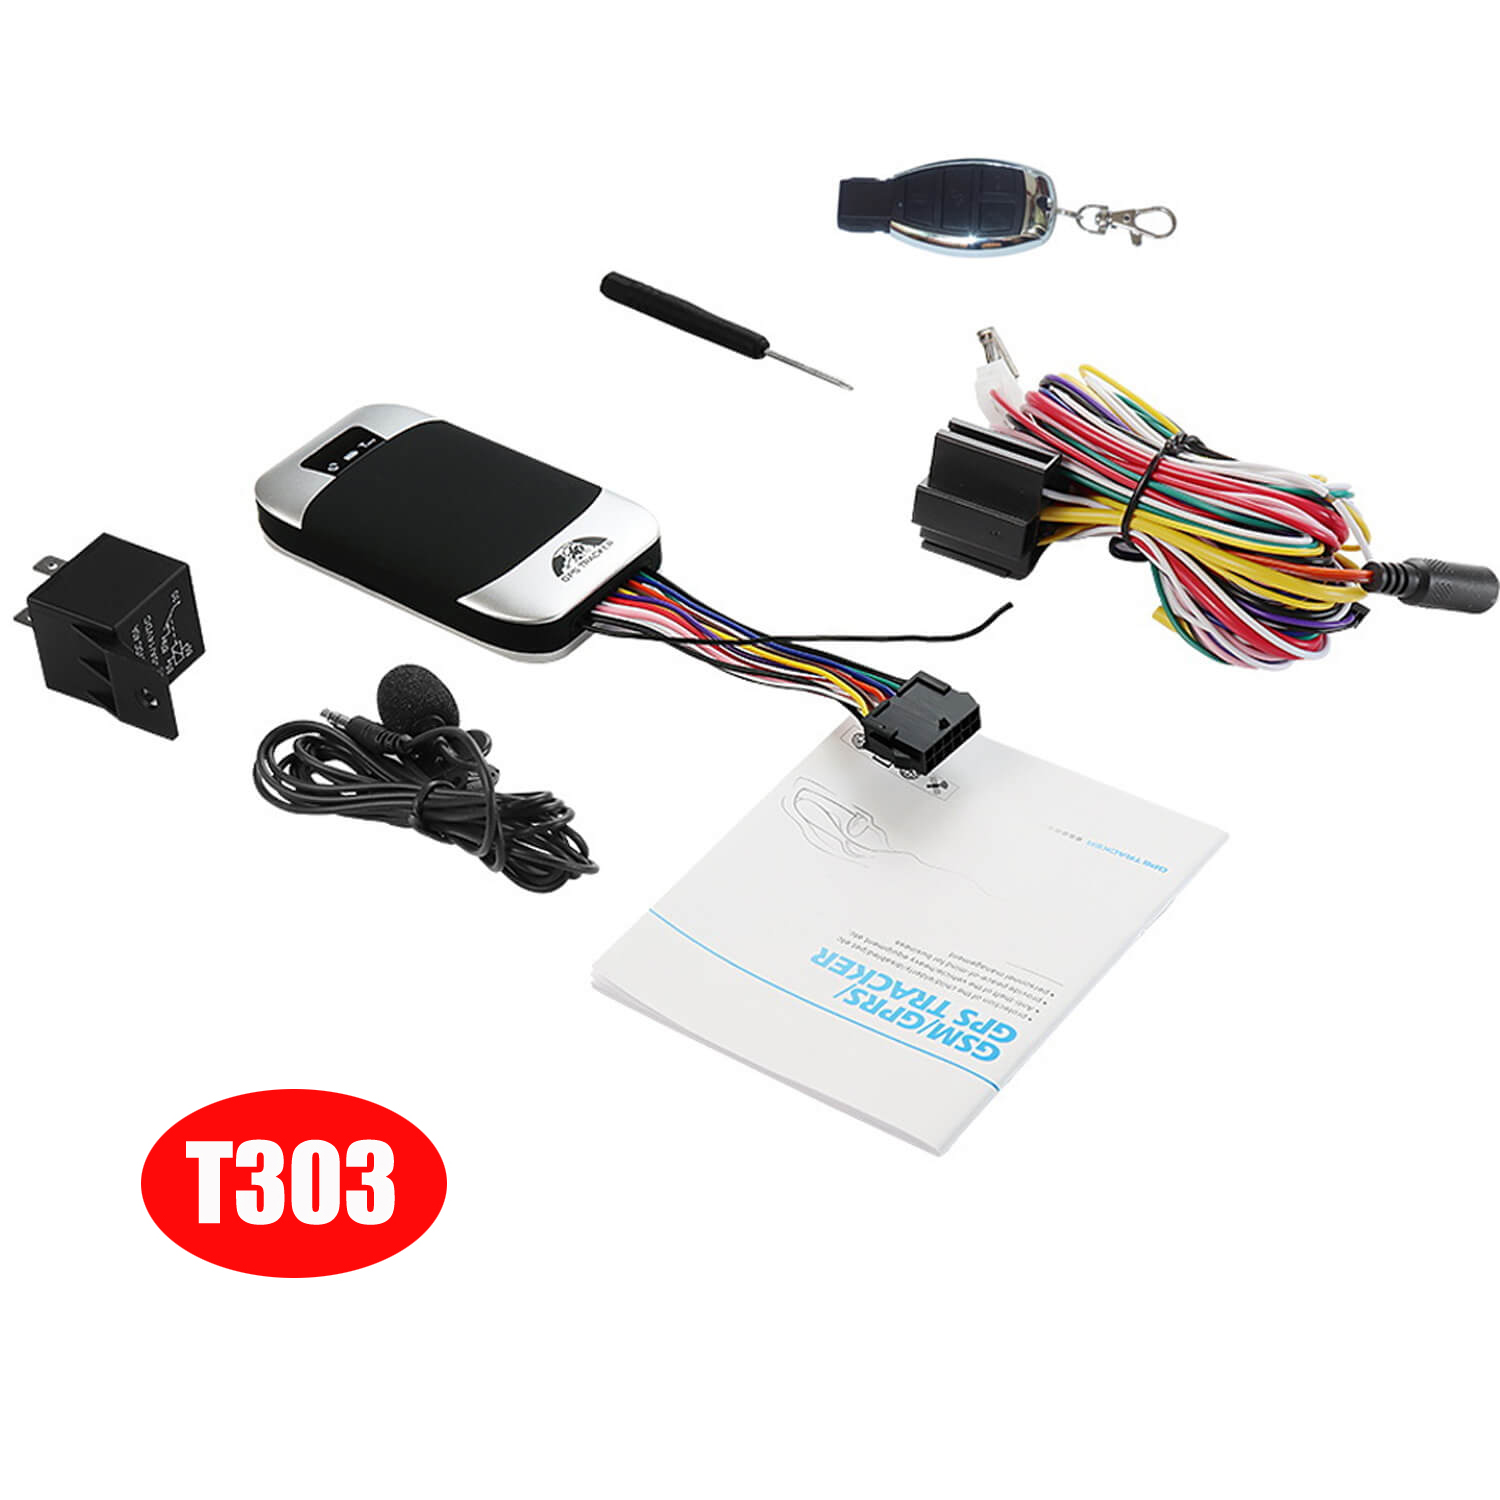 Quality Fleet Management GSM GPS Tracking Device with Shock Sensor 